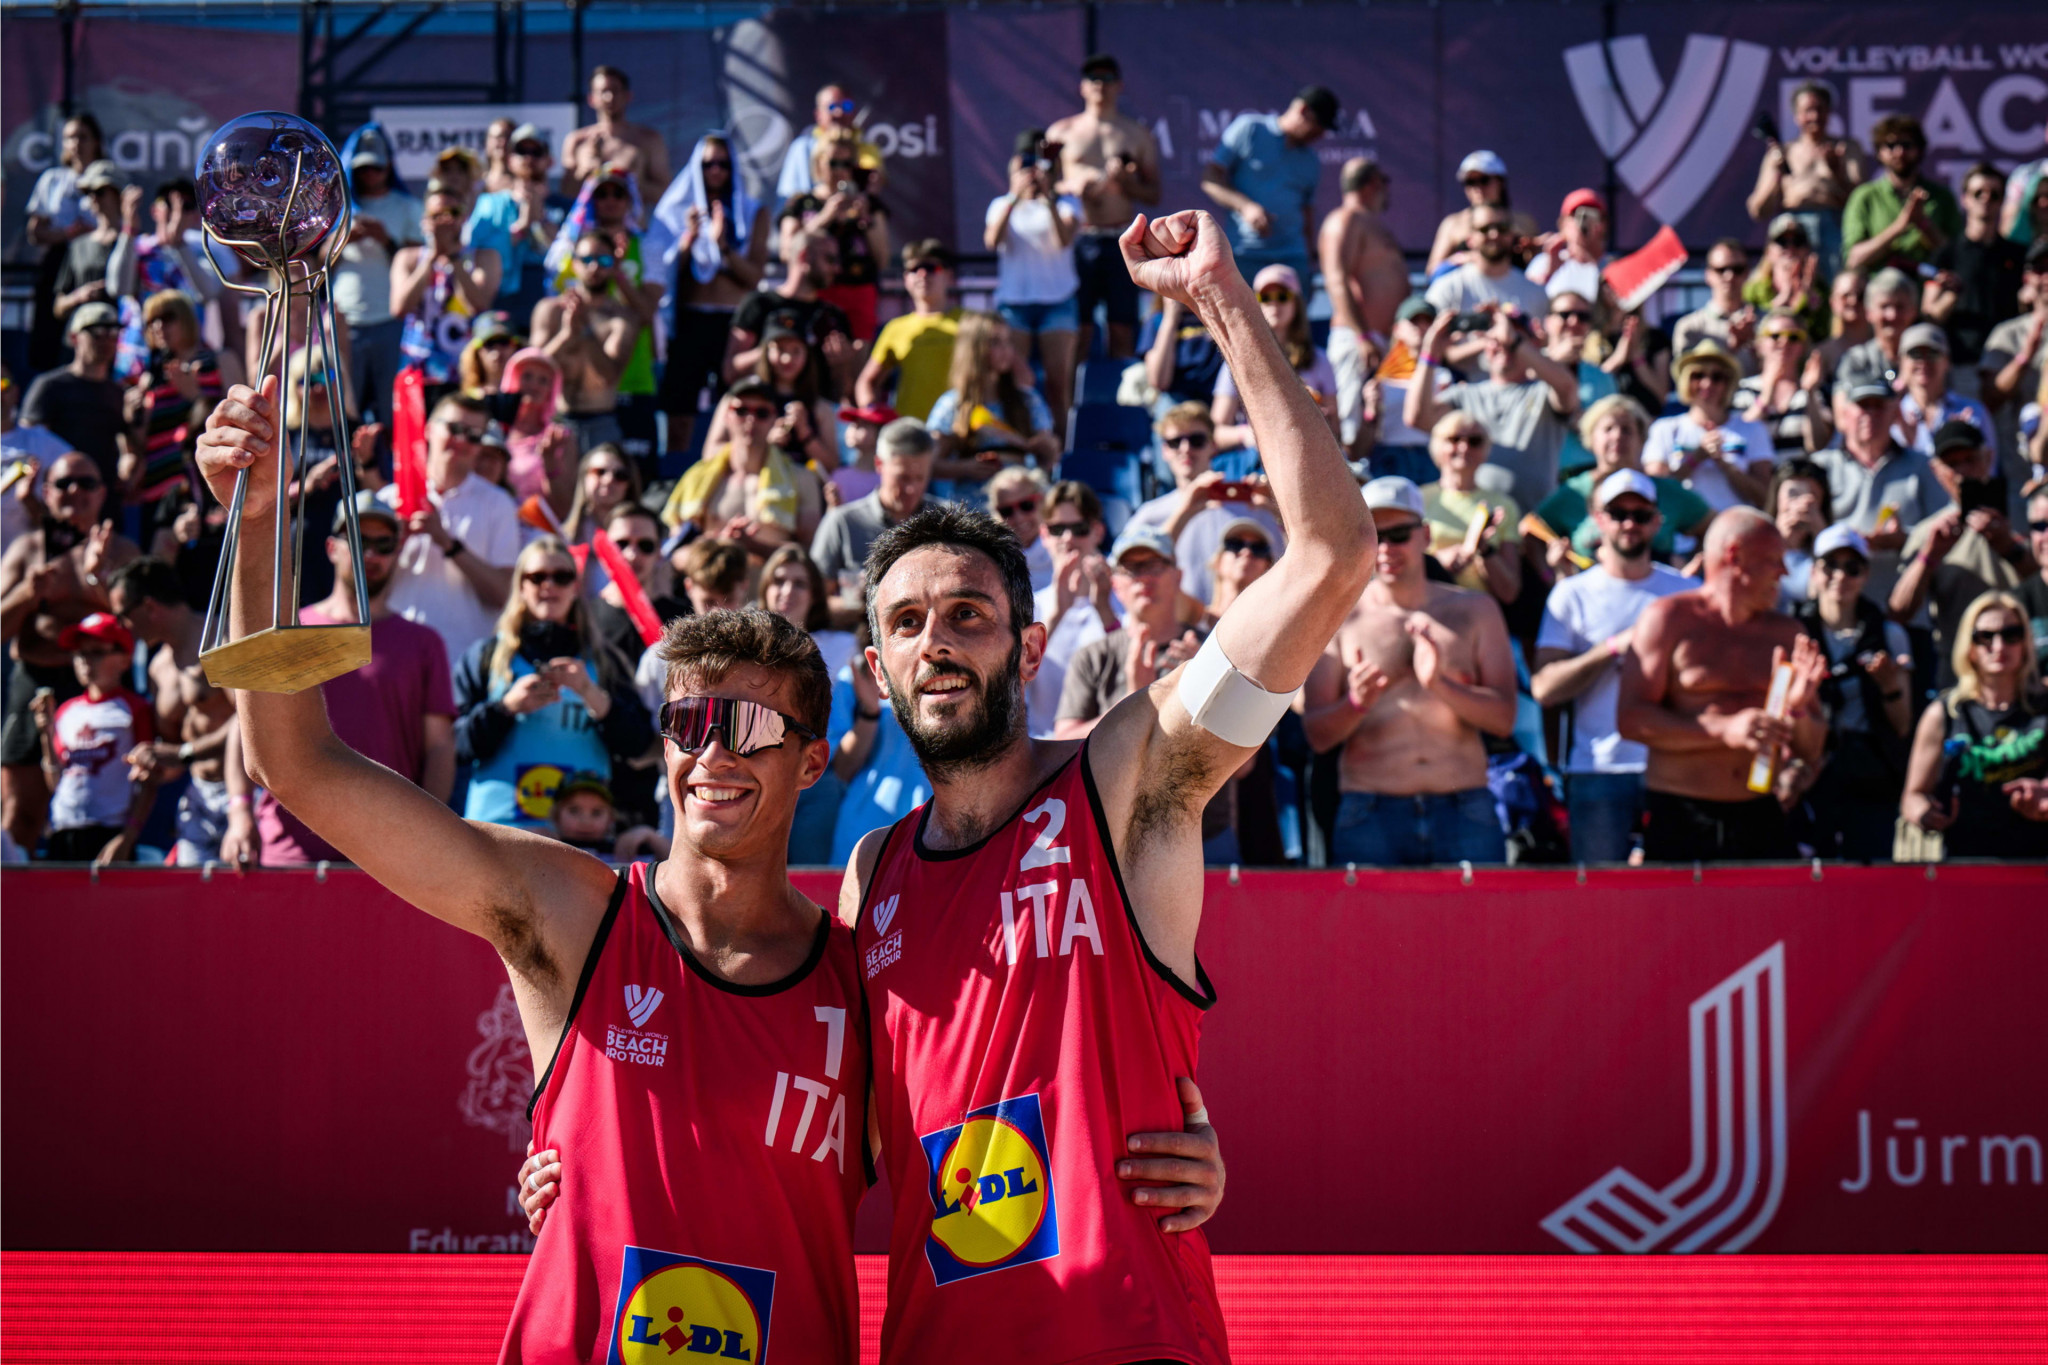 Nicolai and Cottafava victorious at World Volleyball Beach Pro Tour in Jūrmala